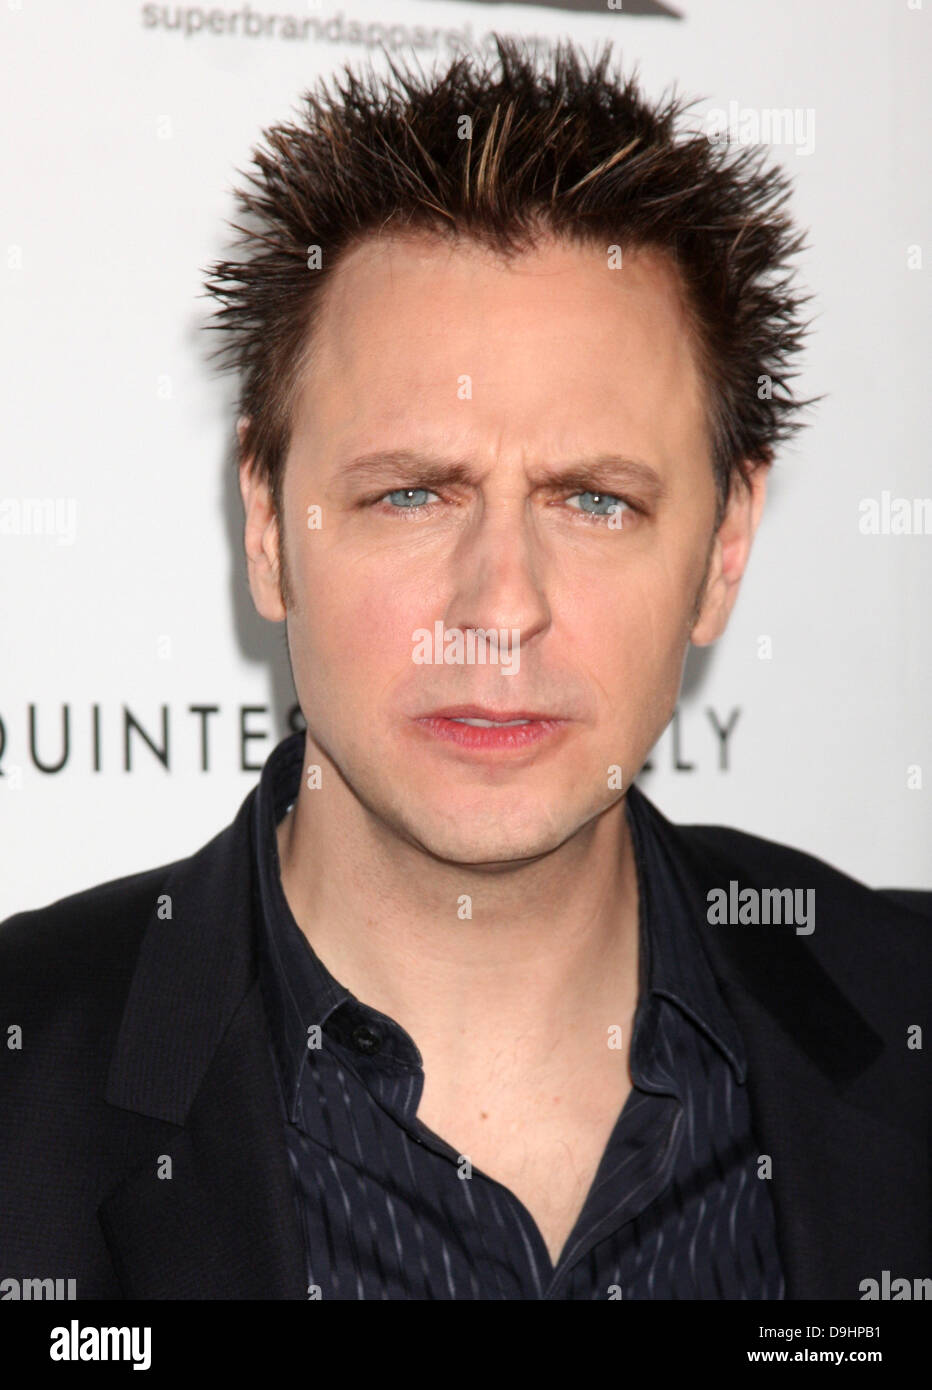 James Gunn Los Angeles Premiere of 'Super' held at The Egyptian Theatre Hollywood, California - 21.03.11 Stock Photo